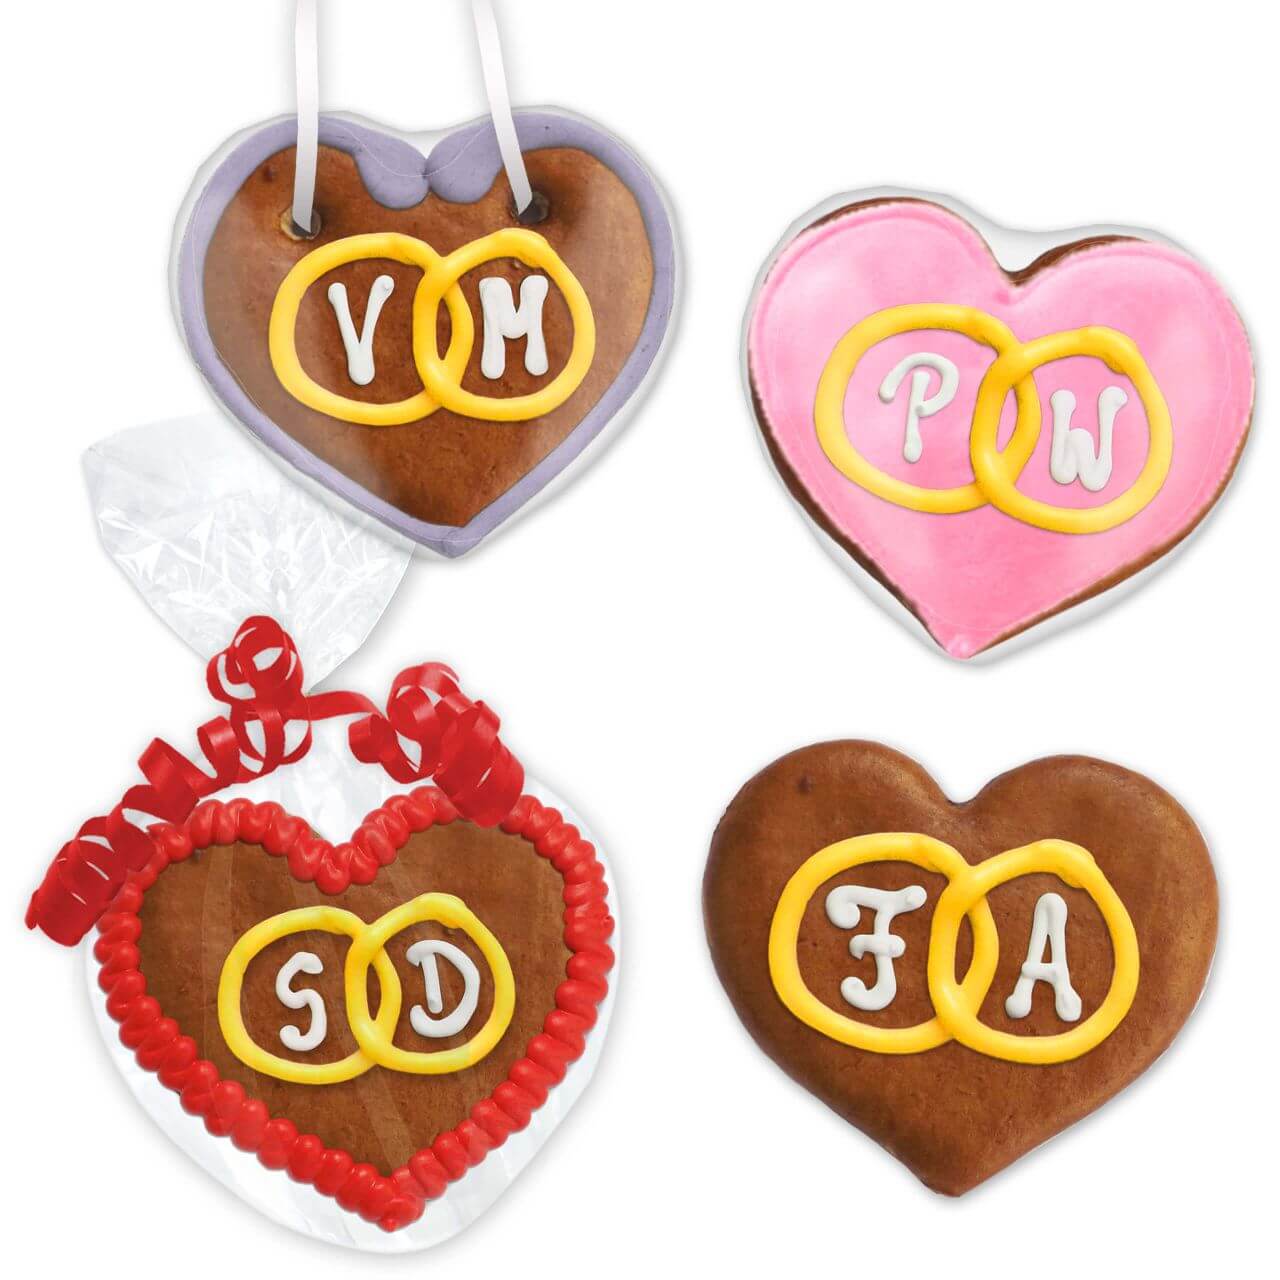 8cm gingerbread heart with initials and wish packaging